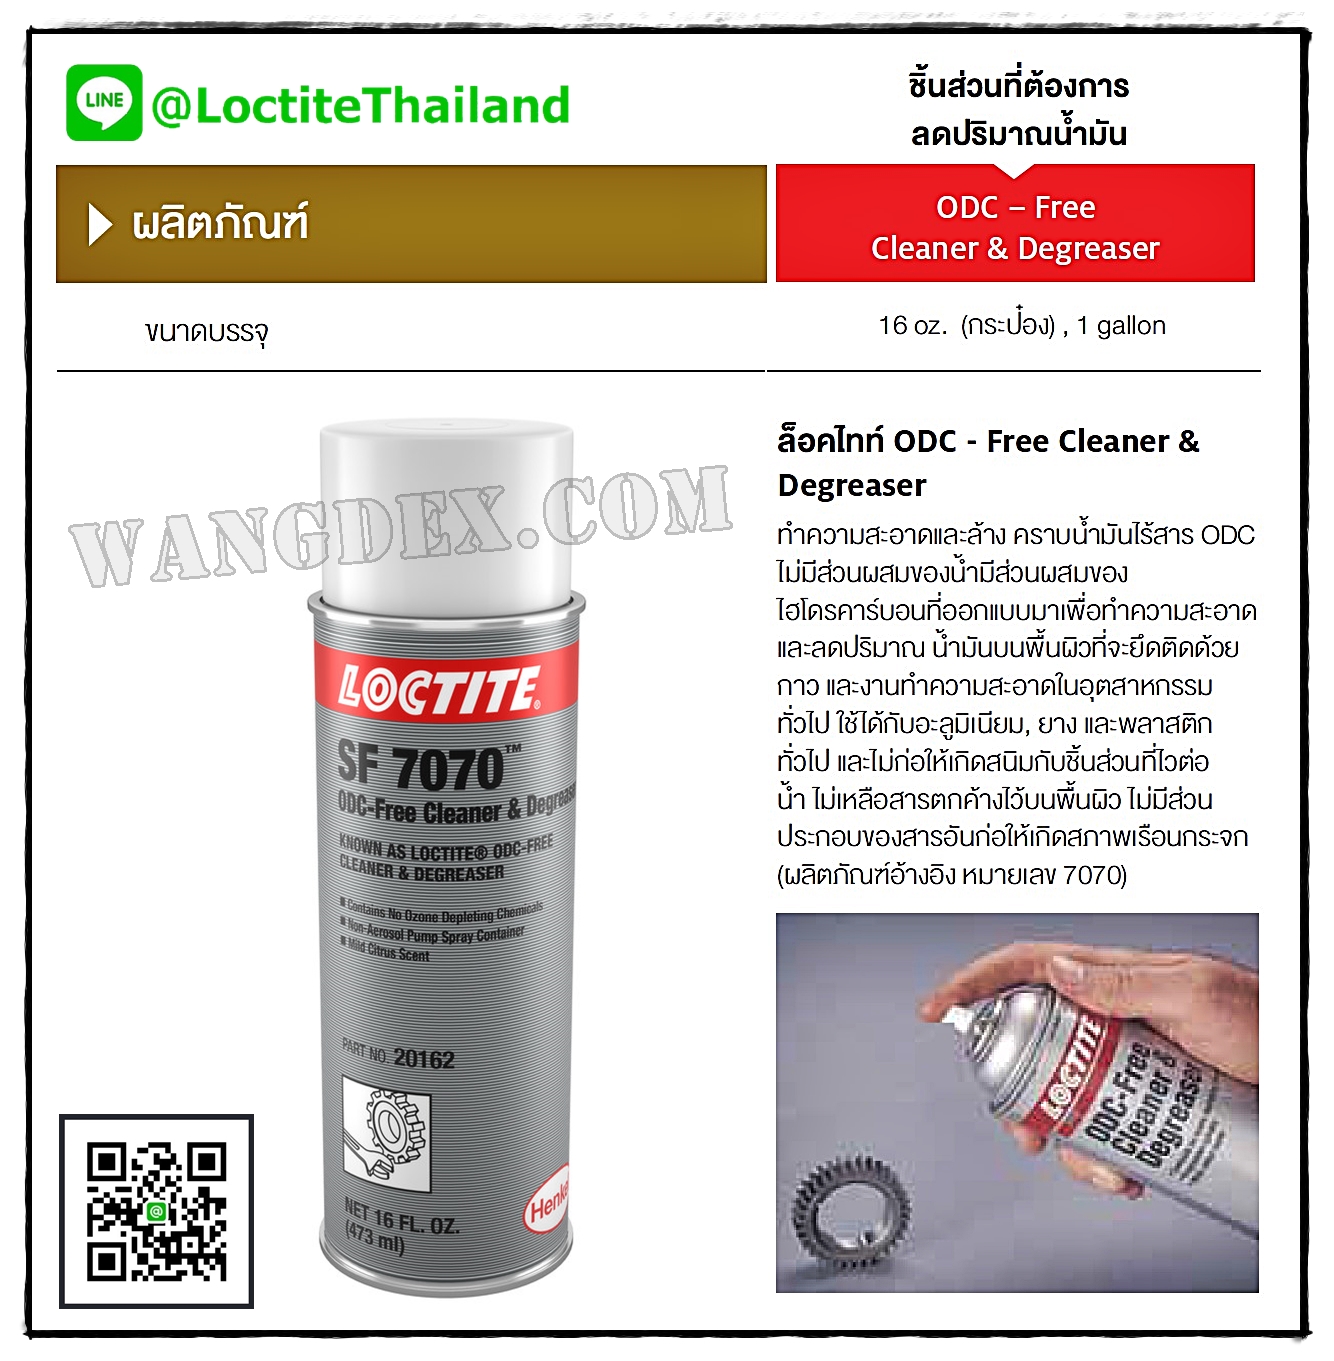 Loctite SF7070 (Cleaner & Degreaser), Loctite item 20162, IDH 135310